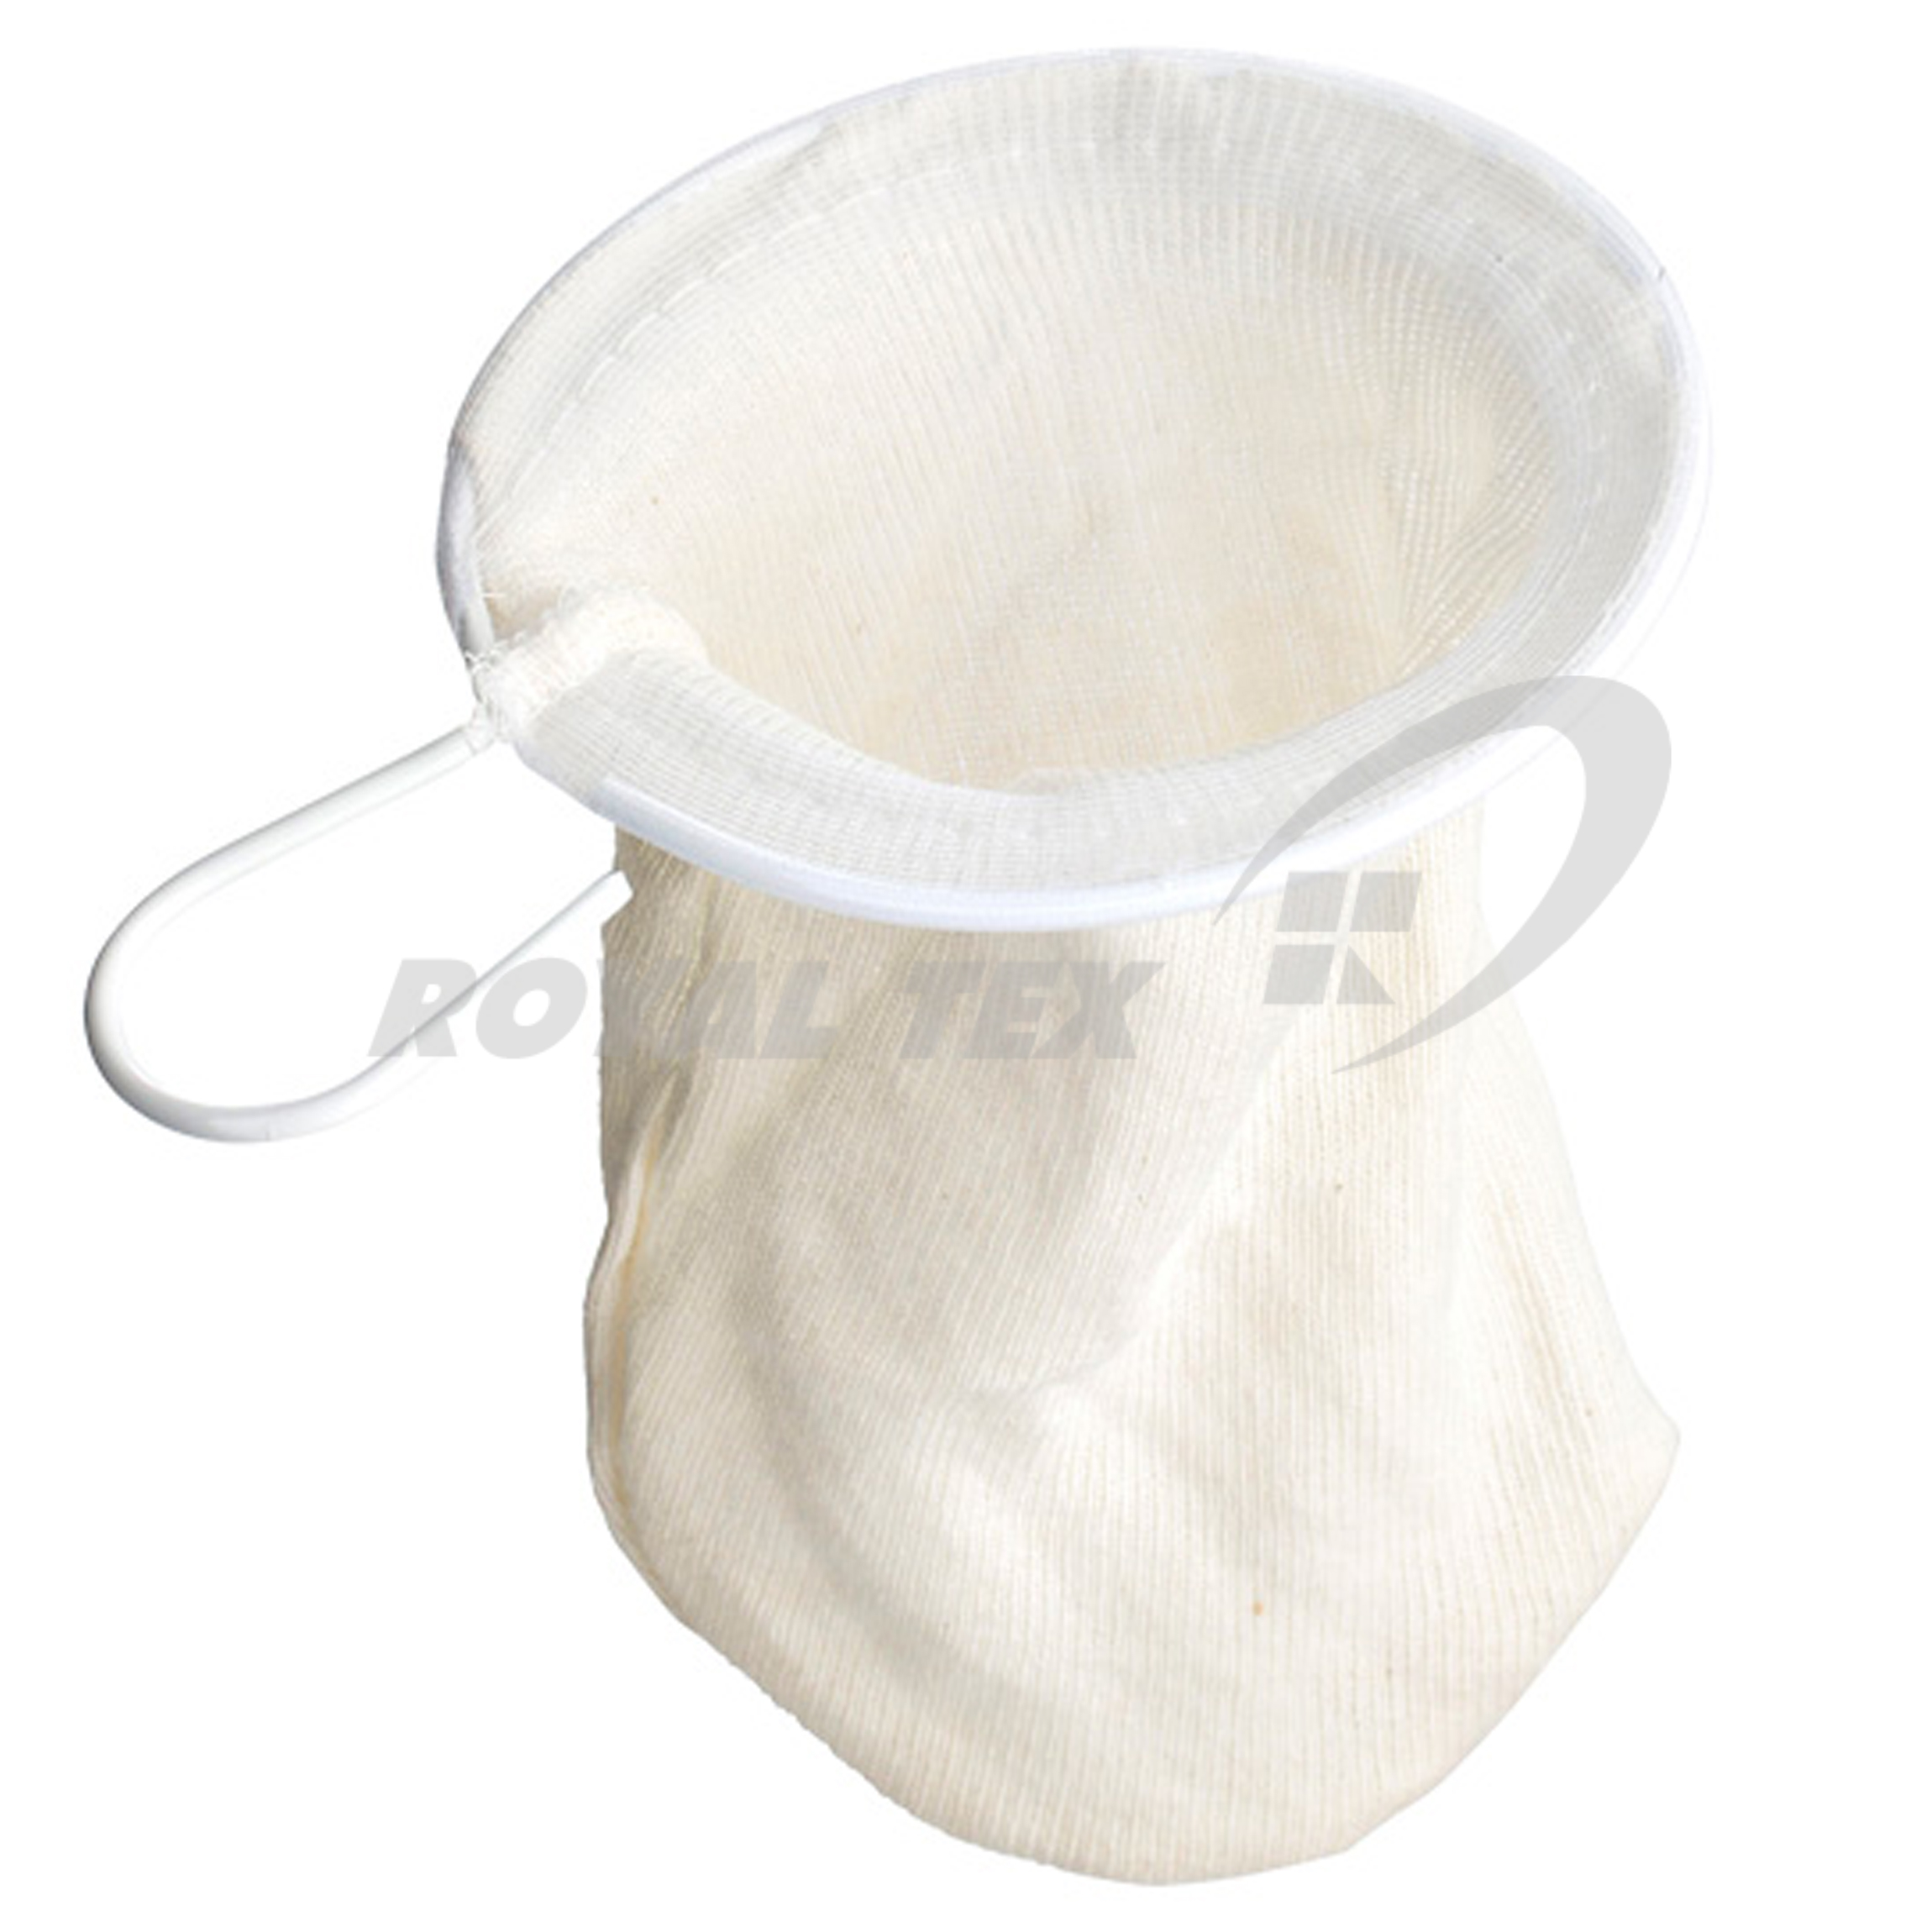 Tea Strainer - knitted cloth